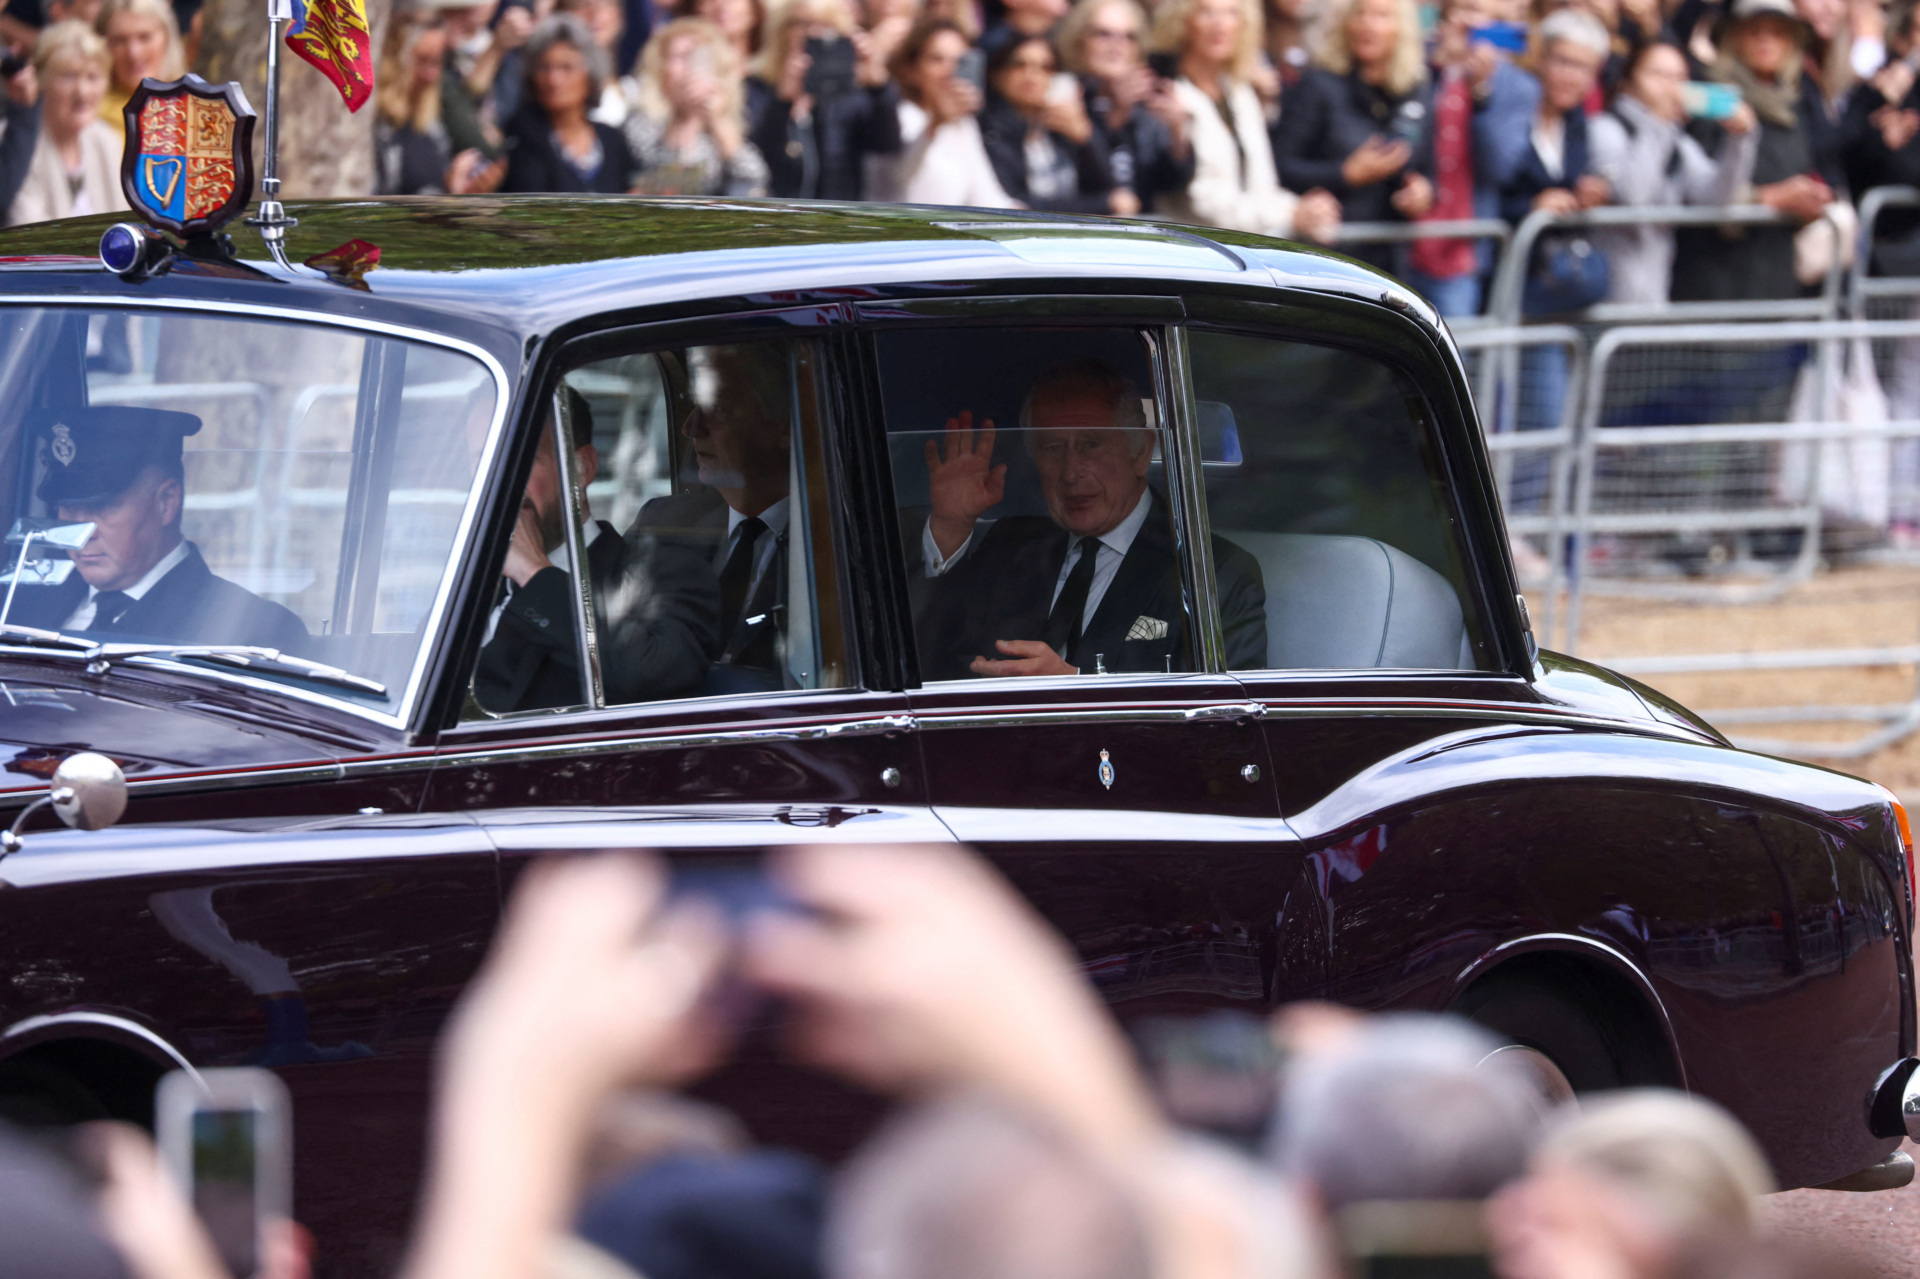 LONDON, ENGLAND - SEPTEMBER 14: King Charles III is driven from Clarence House to Buckingham Palace on September 14, 2022 in London, United Kingdom. Queen Elizabeth II's coffin is taken in procession on a Gun Carriage of The King's Troop Royal Horse Artillery from Buckingham Palace to Westminster Hall where she will lay in state until the early morning of her funeral. Queen Elizabeth II died at Balmoral Castle in Scotland on September 8, 2022, and is succeeded by her eldest son, King Charles III. (Photo by Tom Nicholson - WPA Pool/Getty Images)